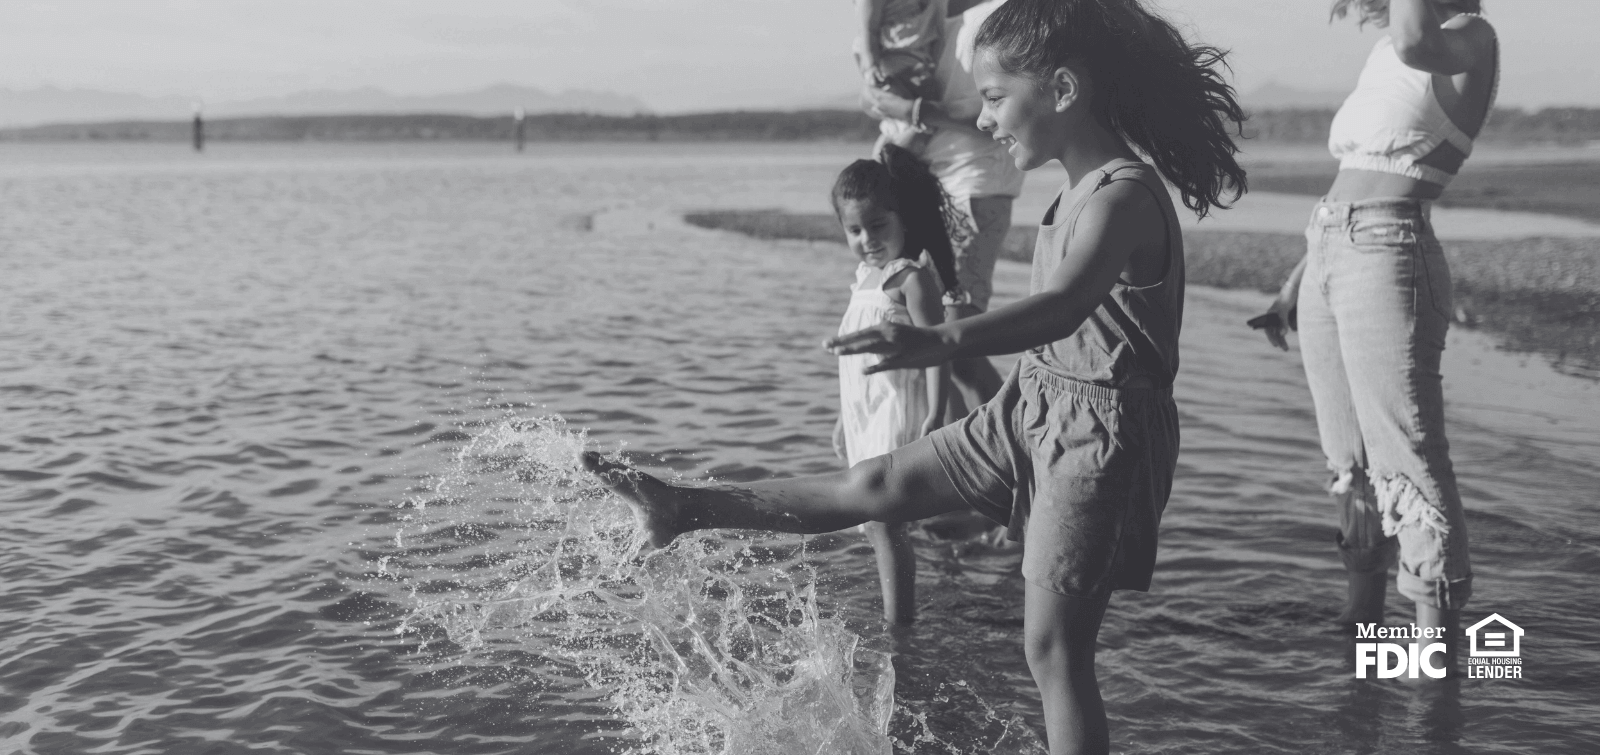 children and adults playing in the water at a beach